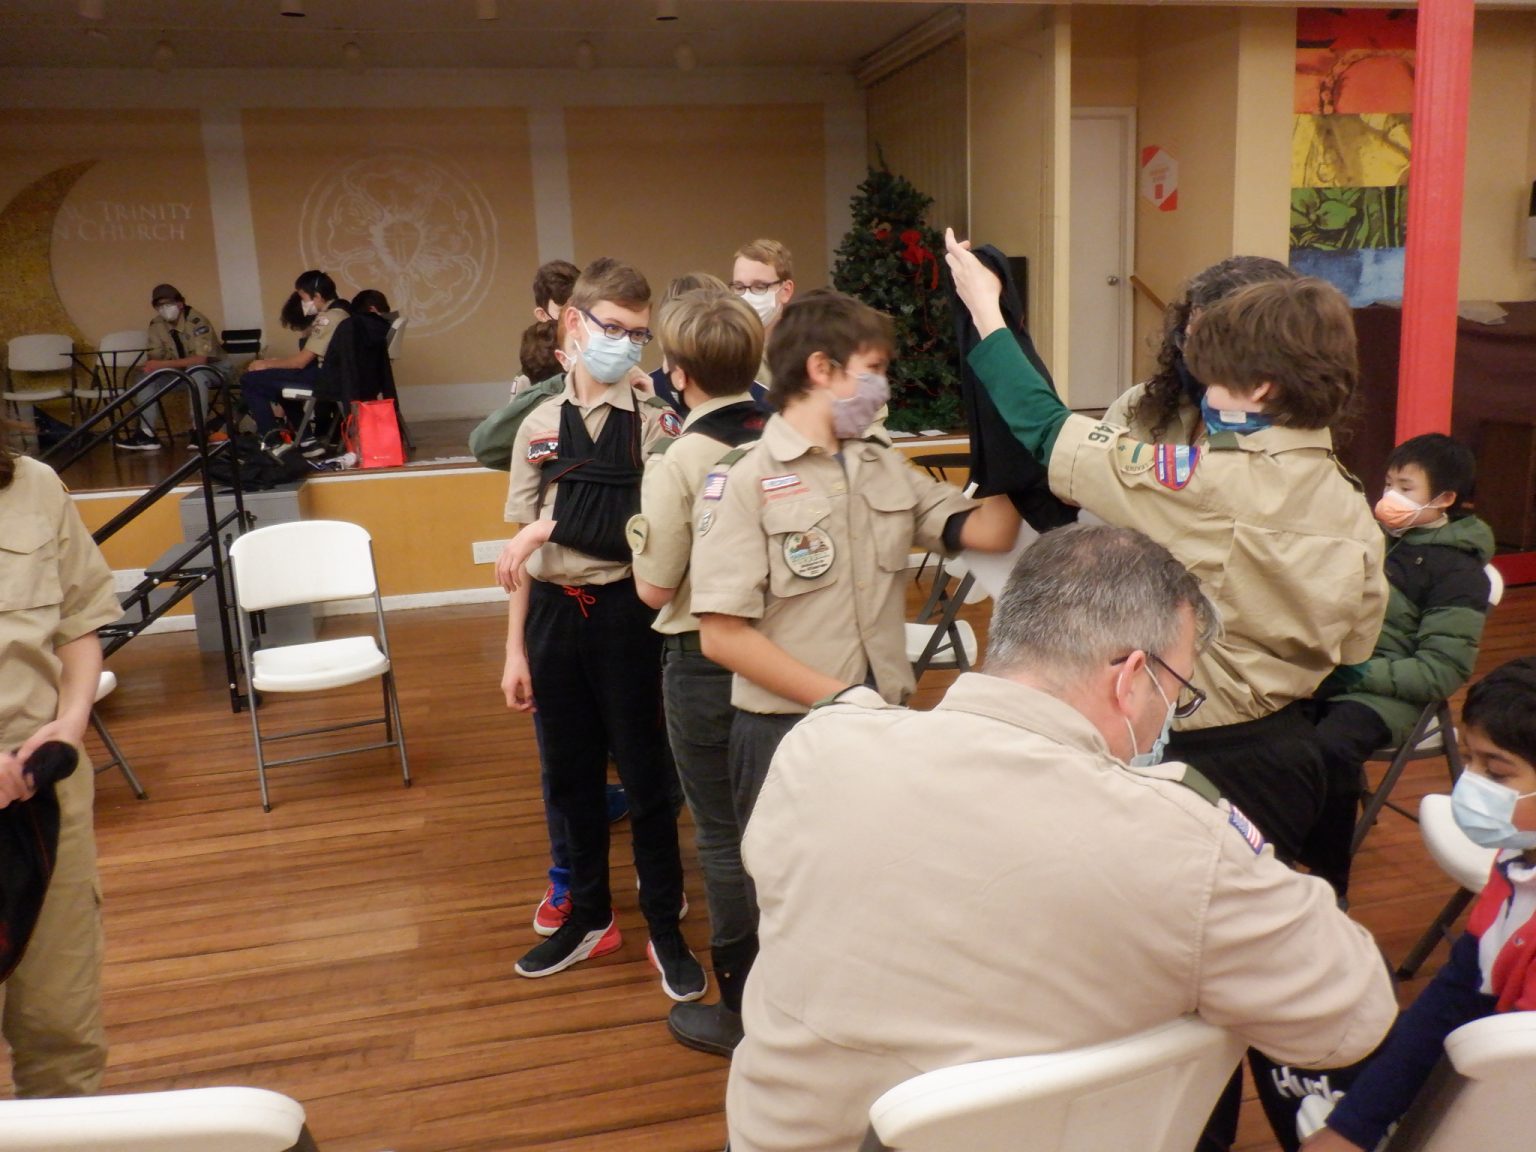 Cub Scout Helps Dad with First Aid Learned at Boy Scout Meeting - TROOP 146